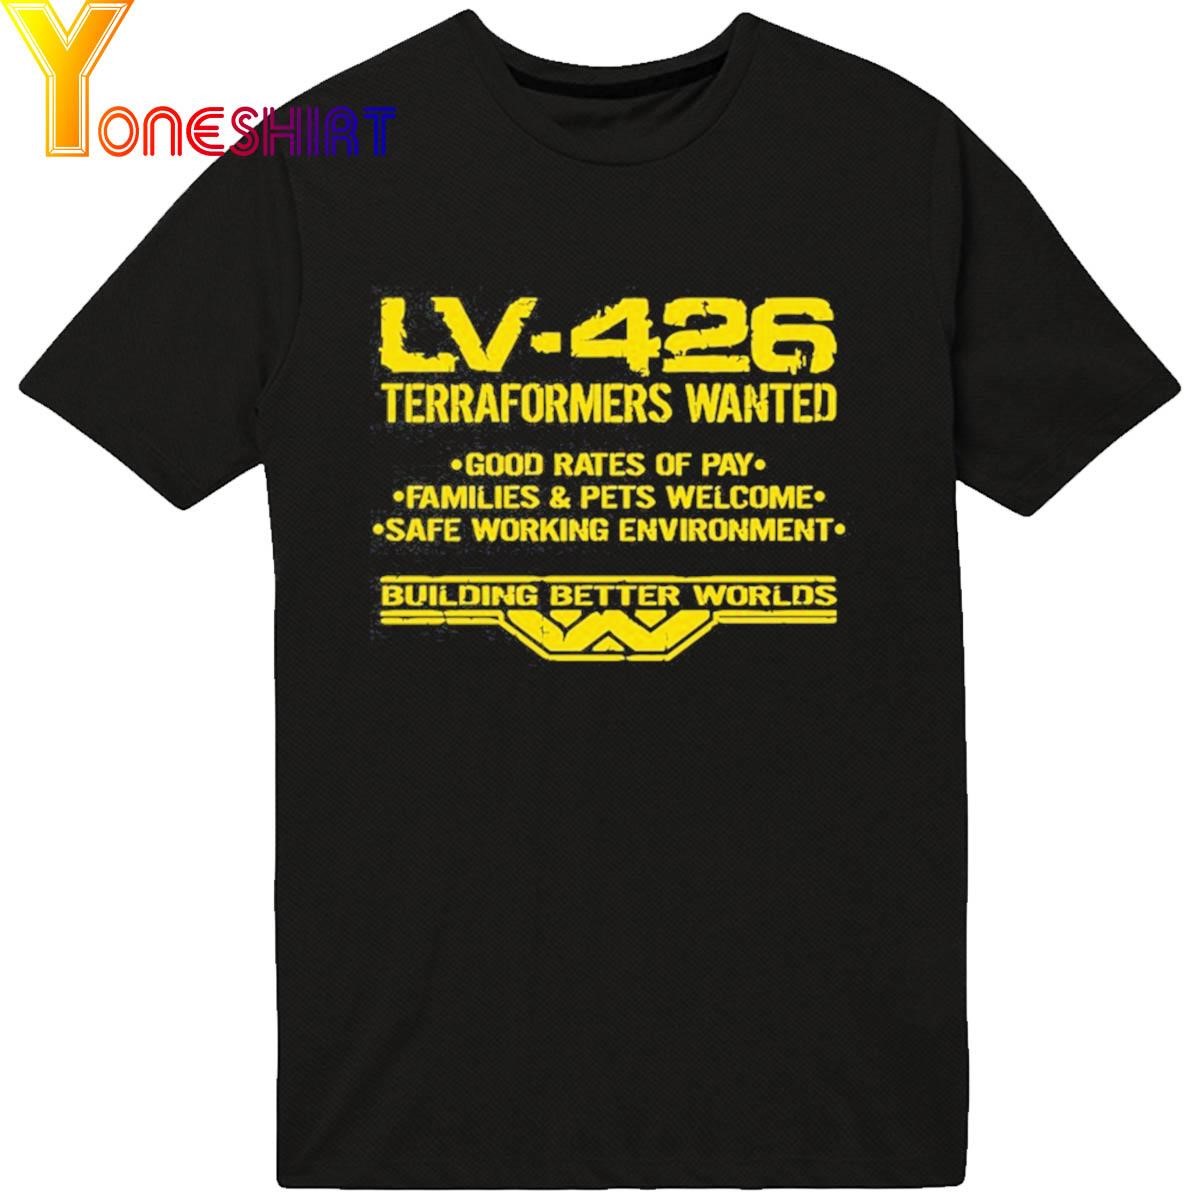 Lv-426 Terraformers Wanted Good Rates Of Pay Families And Pets Welcome Safe Working Environment shirt